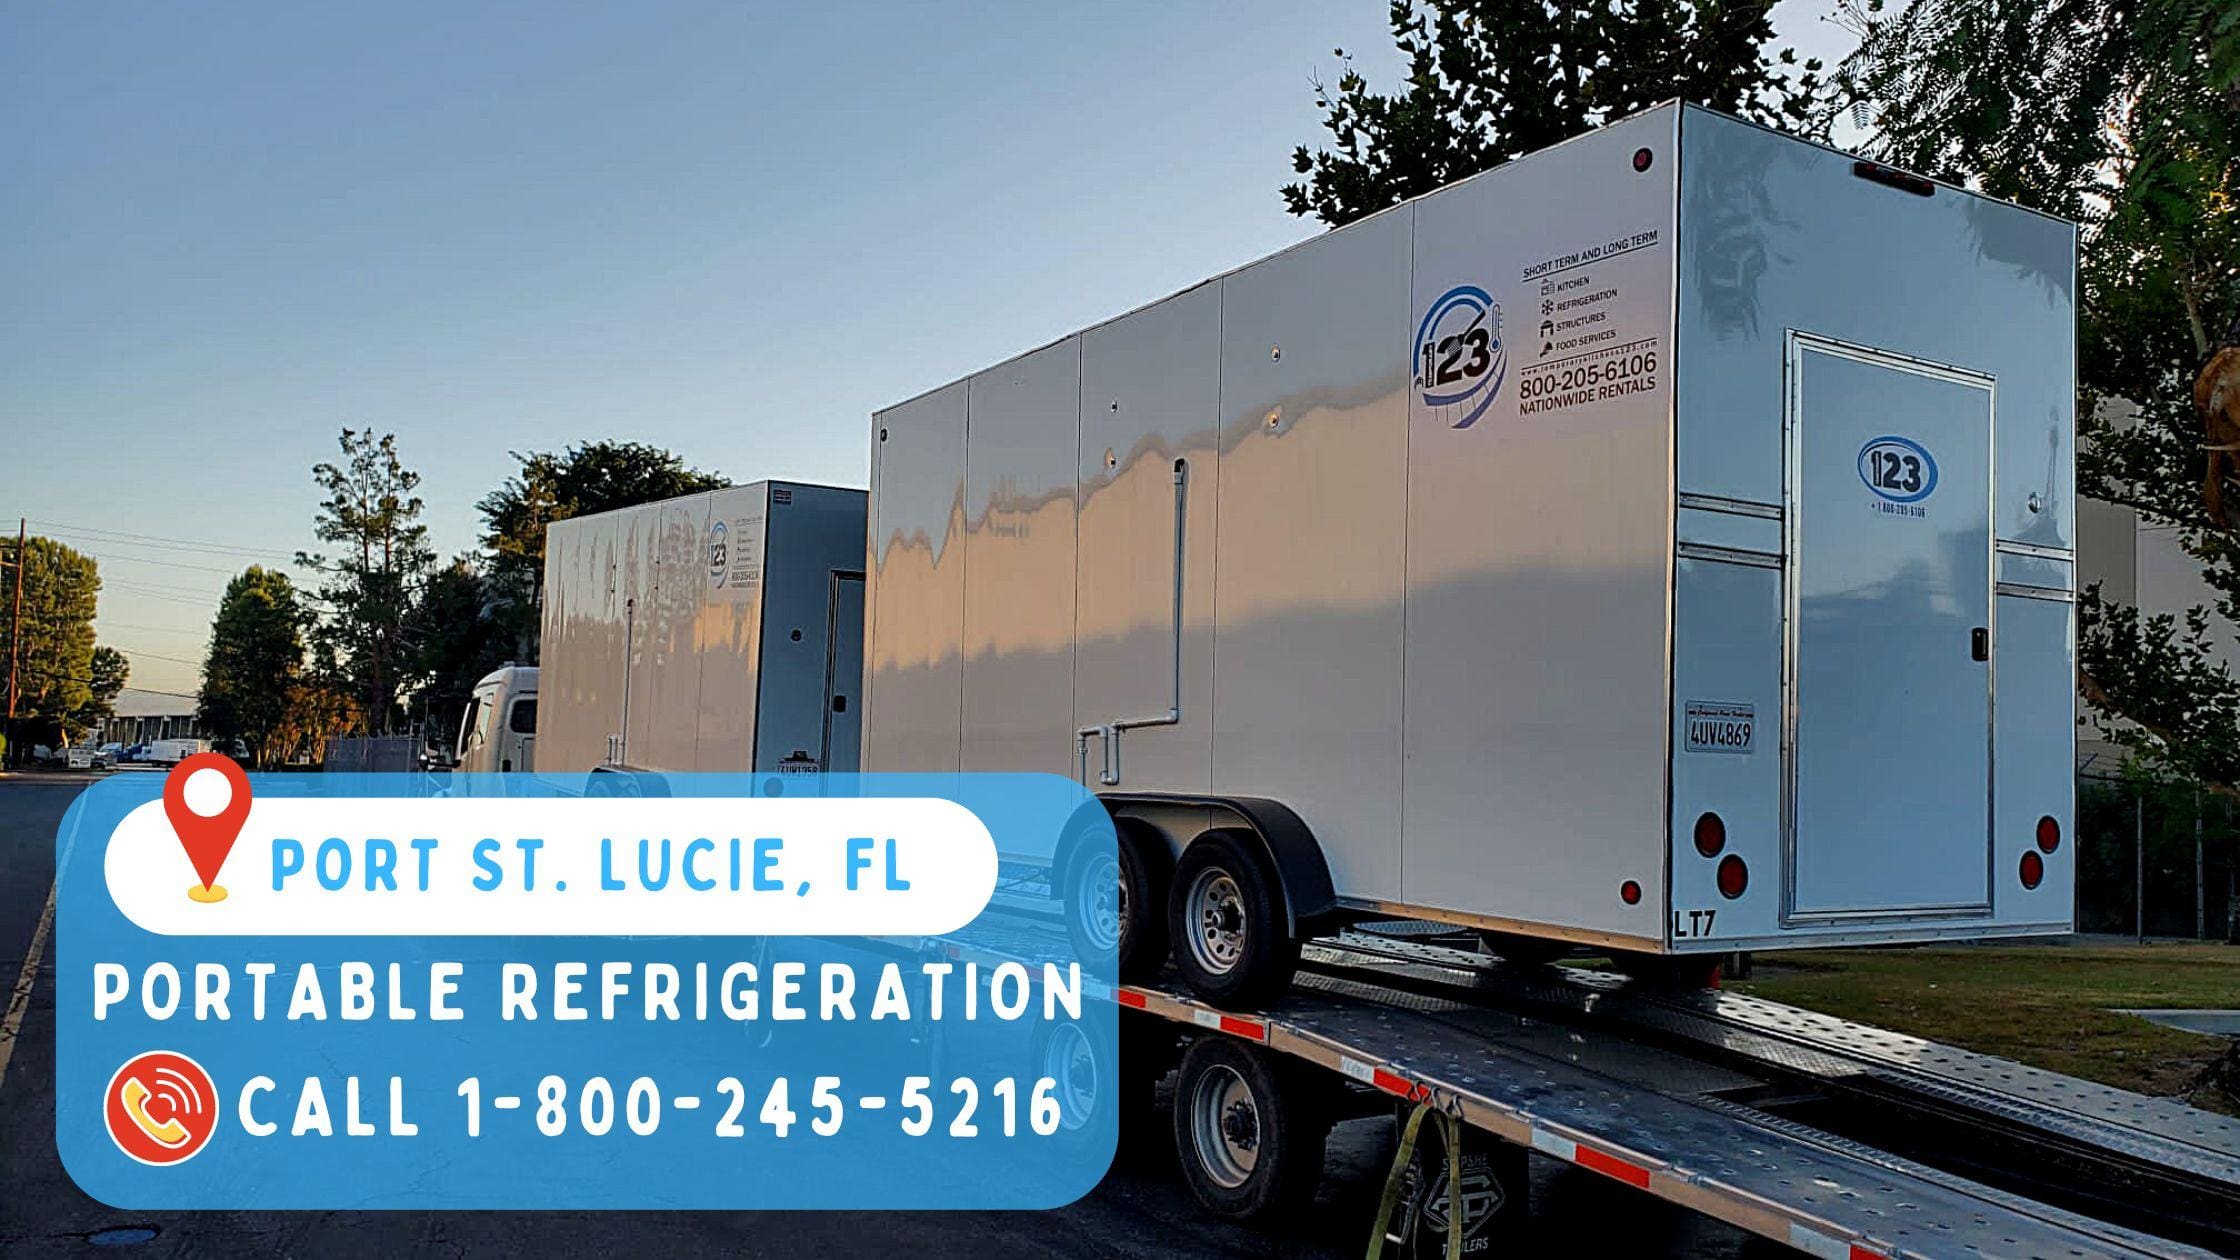 Portable refrigeration located in Port St. Lucie